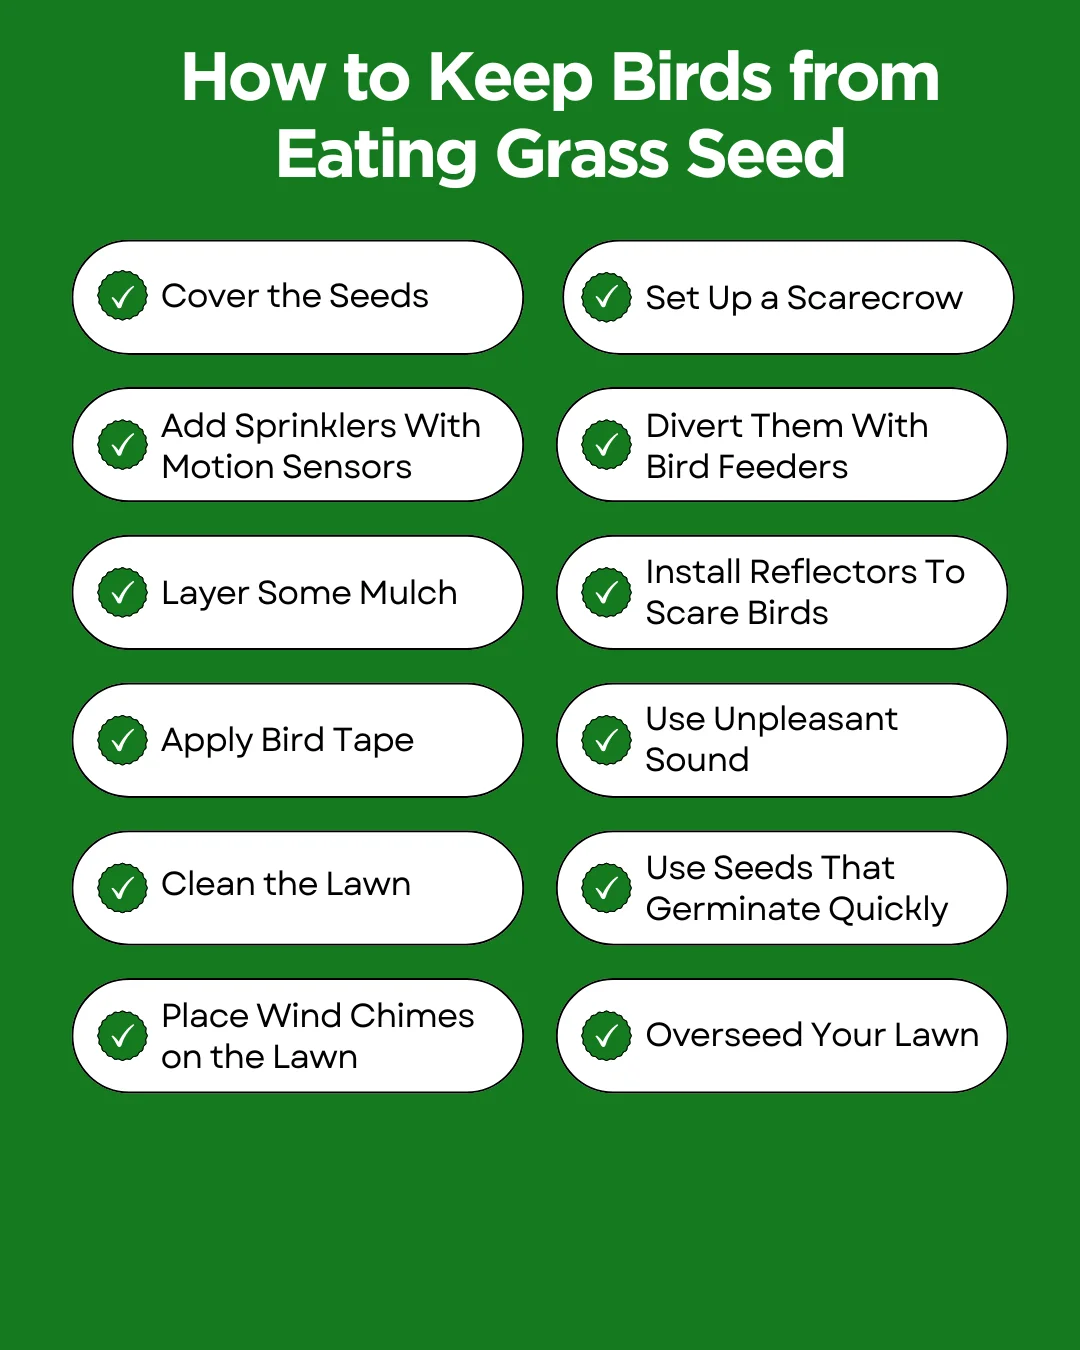 An infographic on how to keep birds from eating grass seed